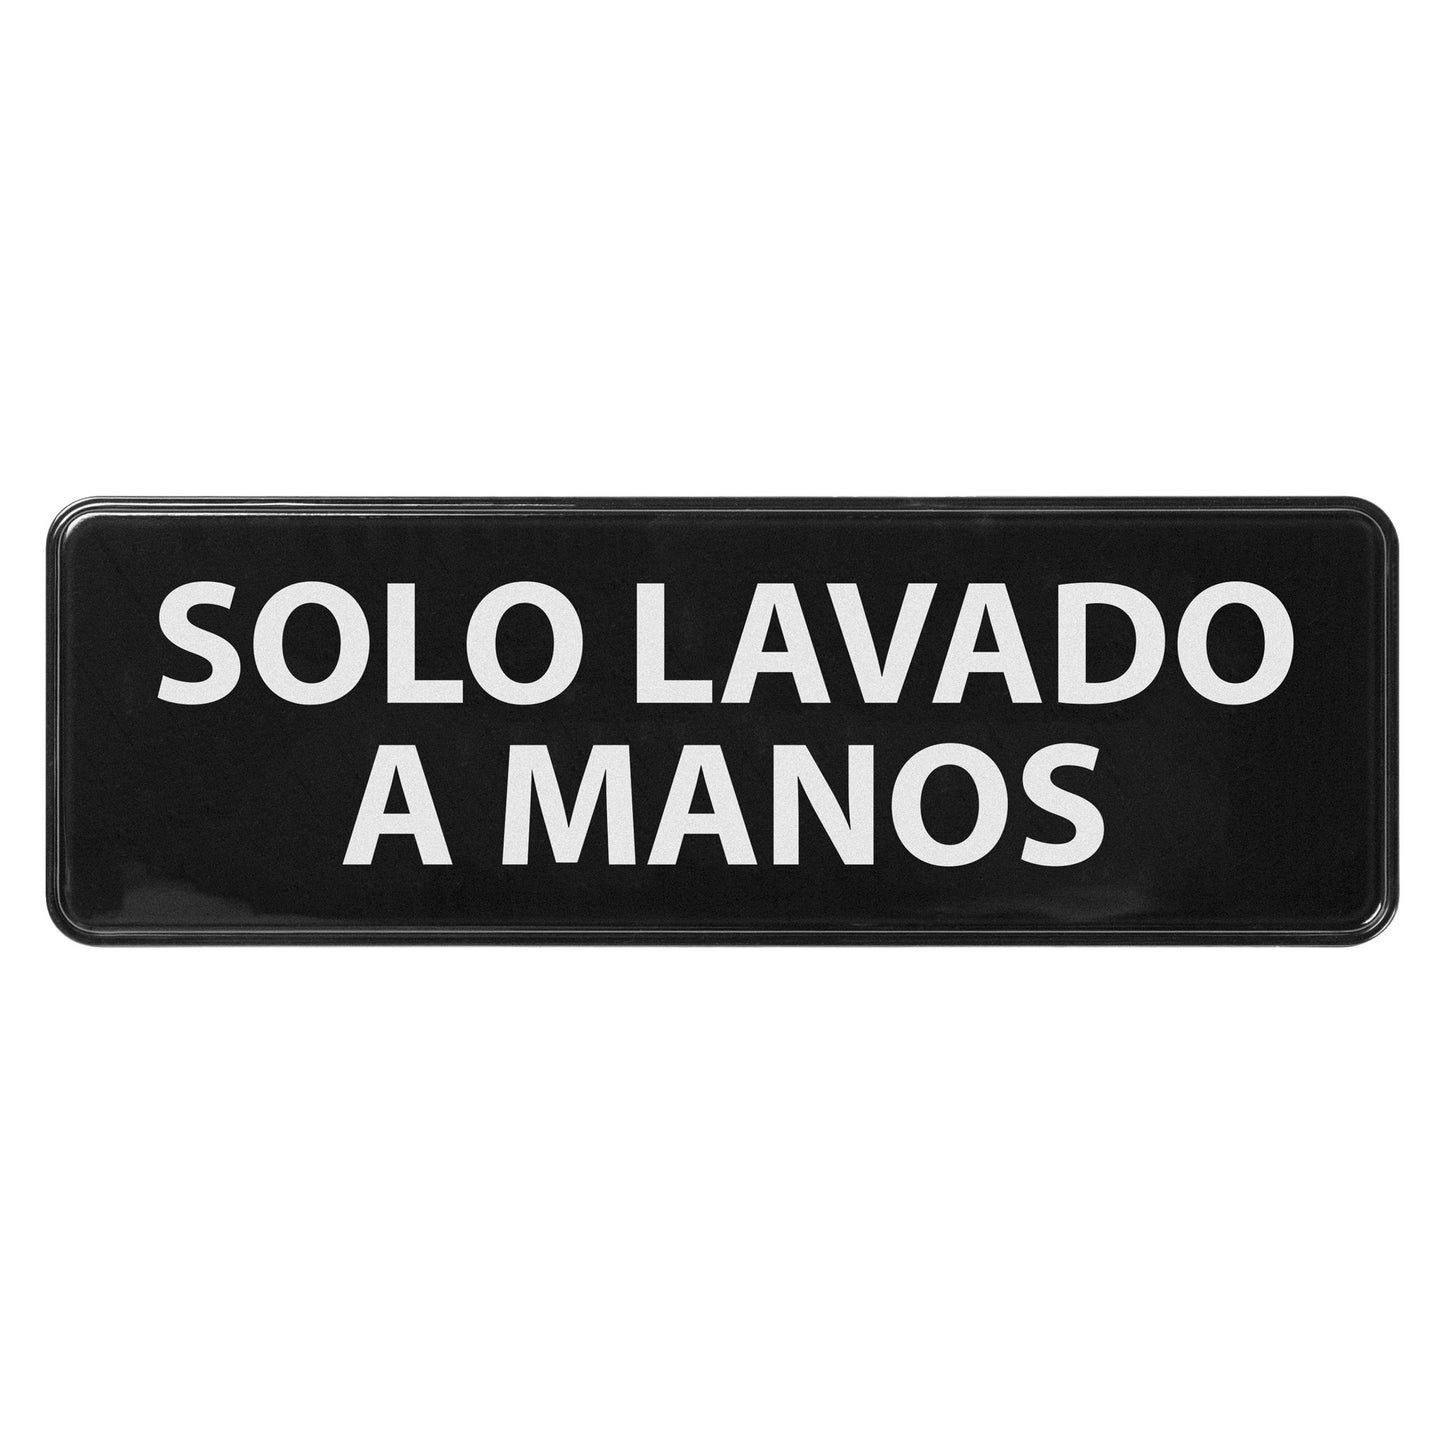 SGN-366 - Information Signs, 9"W x 3"H, Spanish - SGN-366 - Hand Wash Only